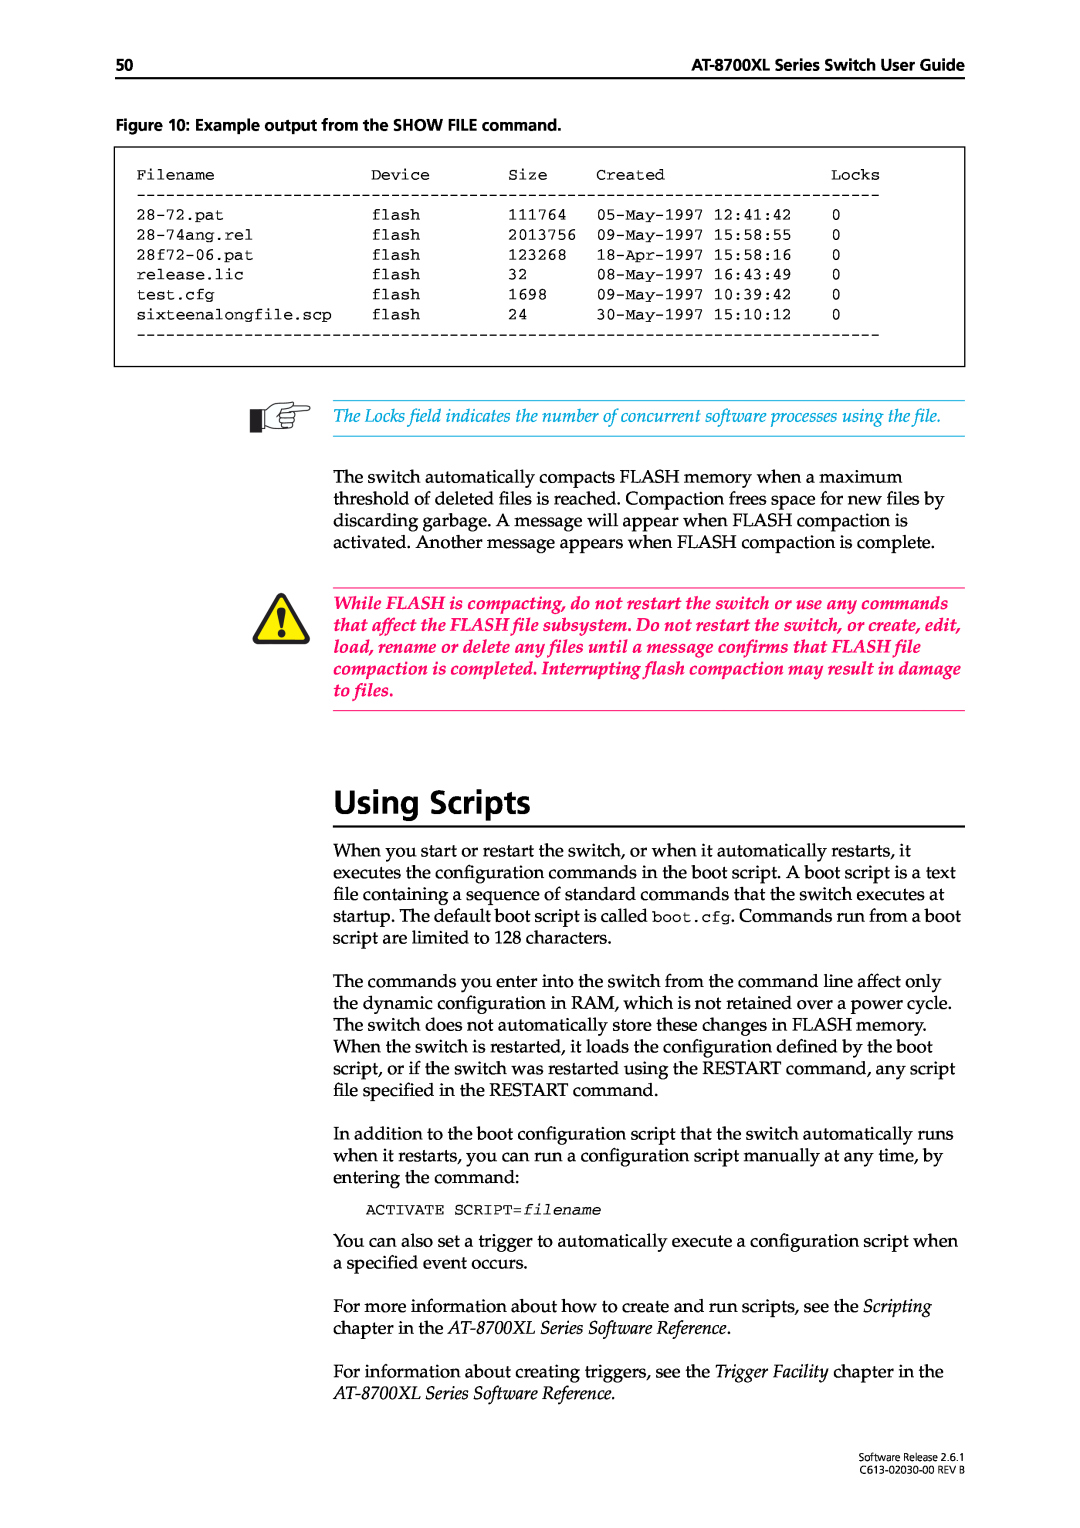 Allied Telesis at-8700xl series switch manual Using Scripts, AT-8700XL Series Software Reference 